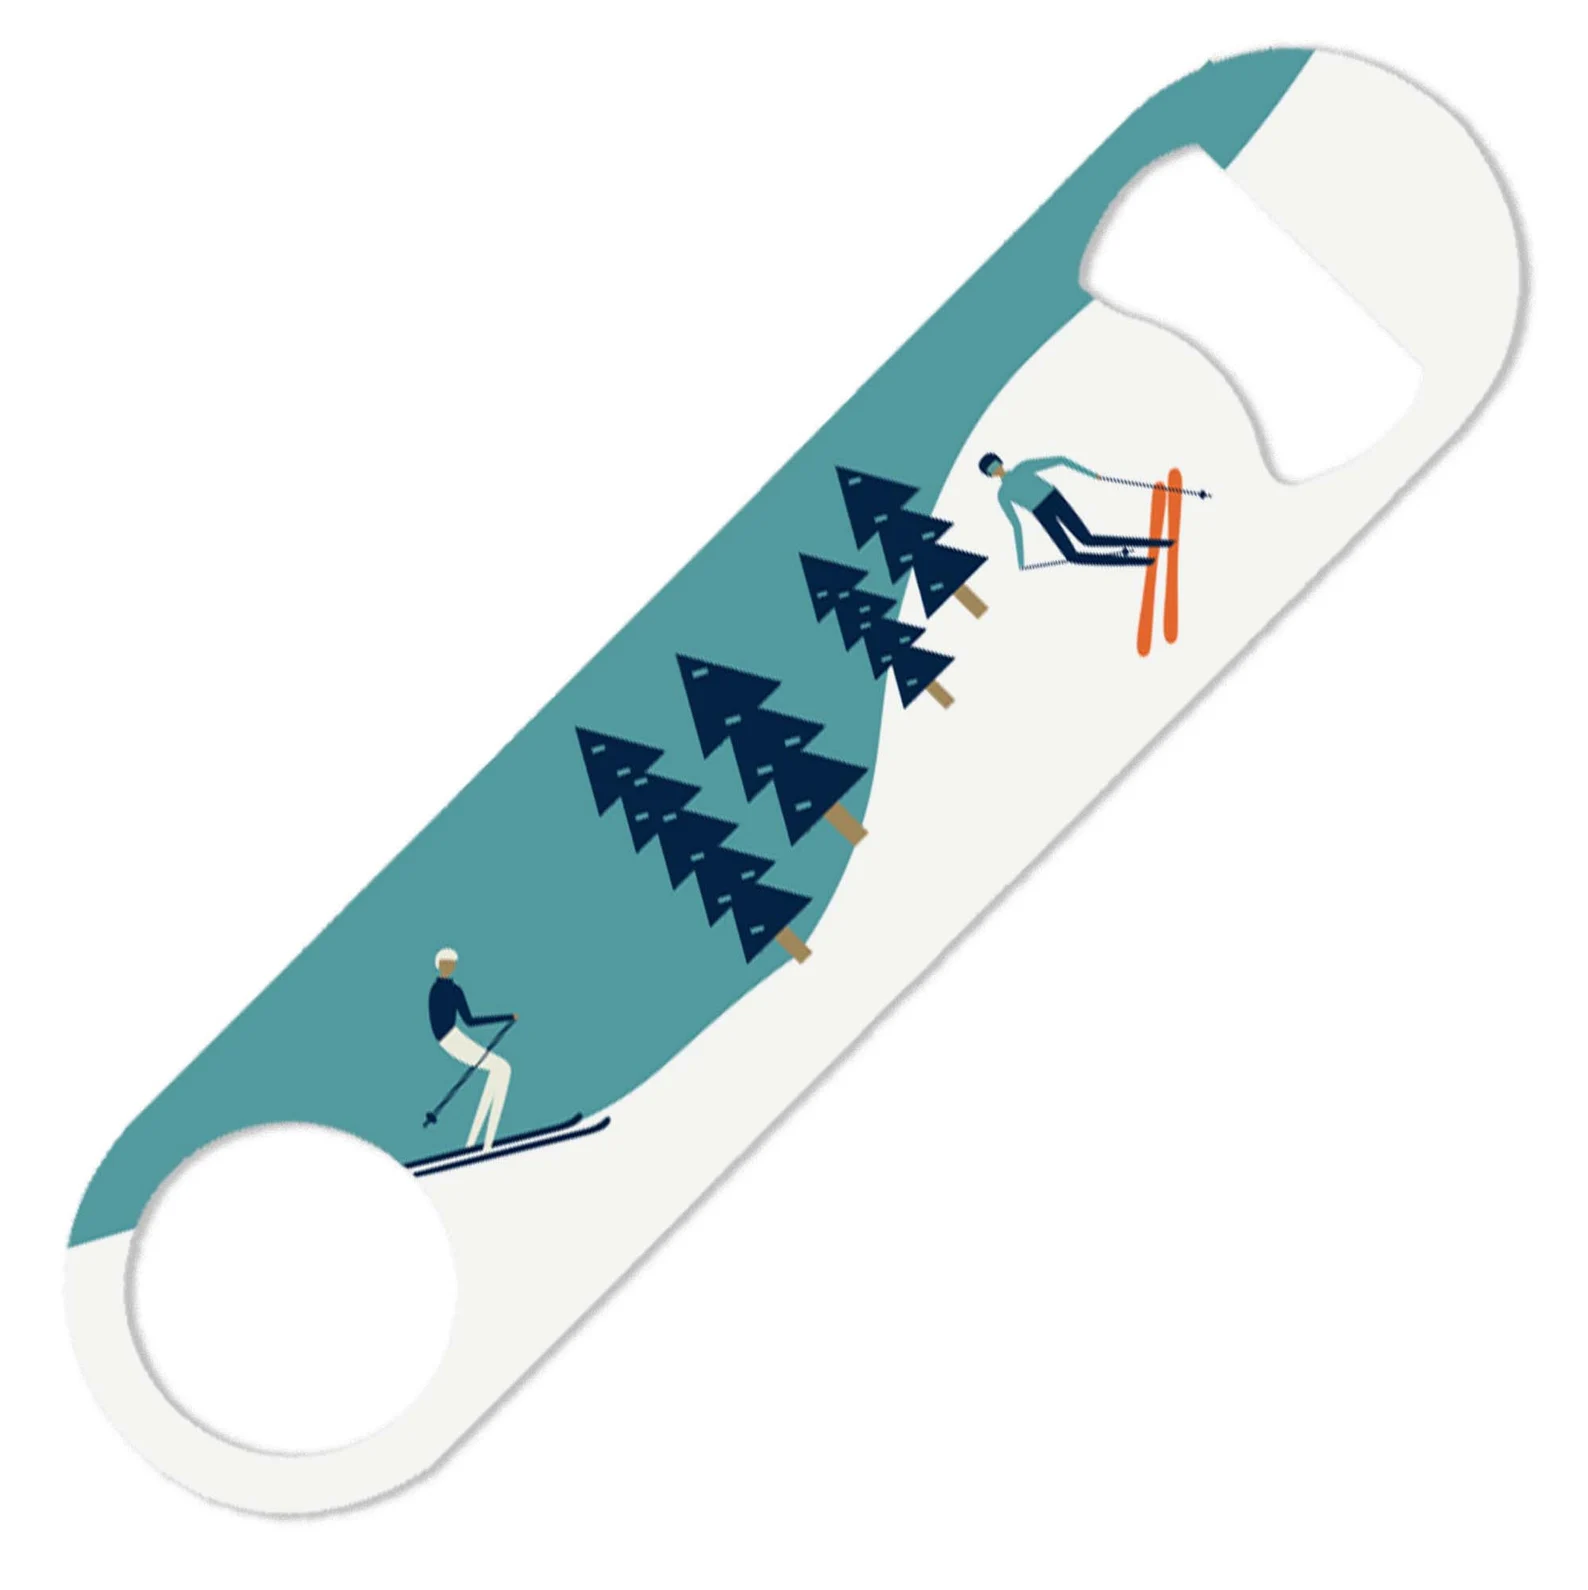 Ski Bottle opener - fun things to pack for a ski trip